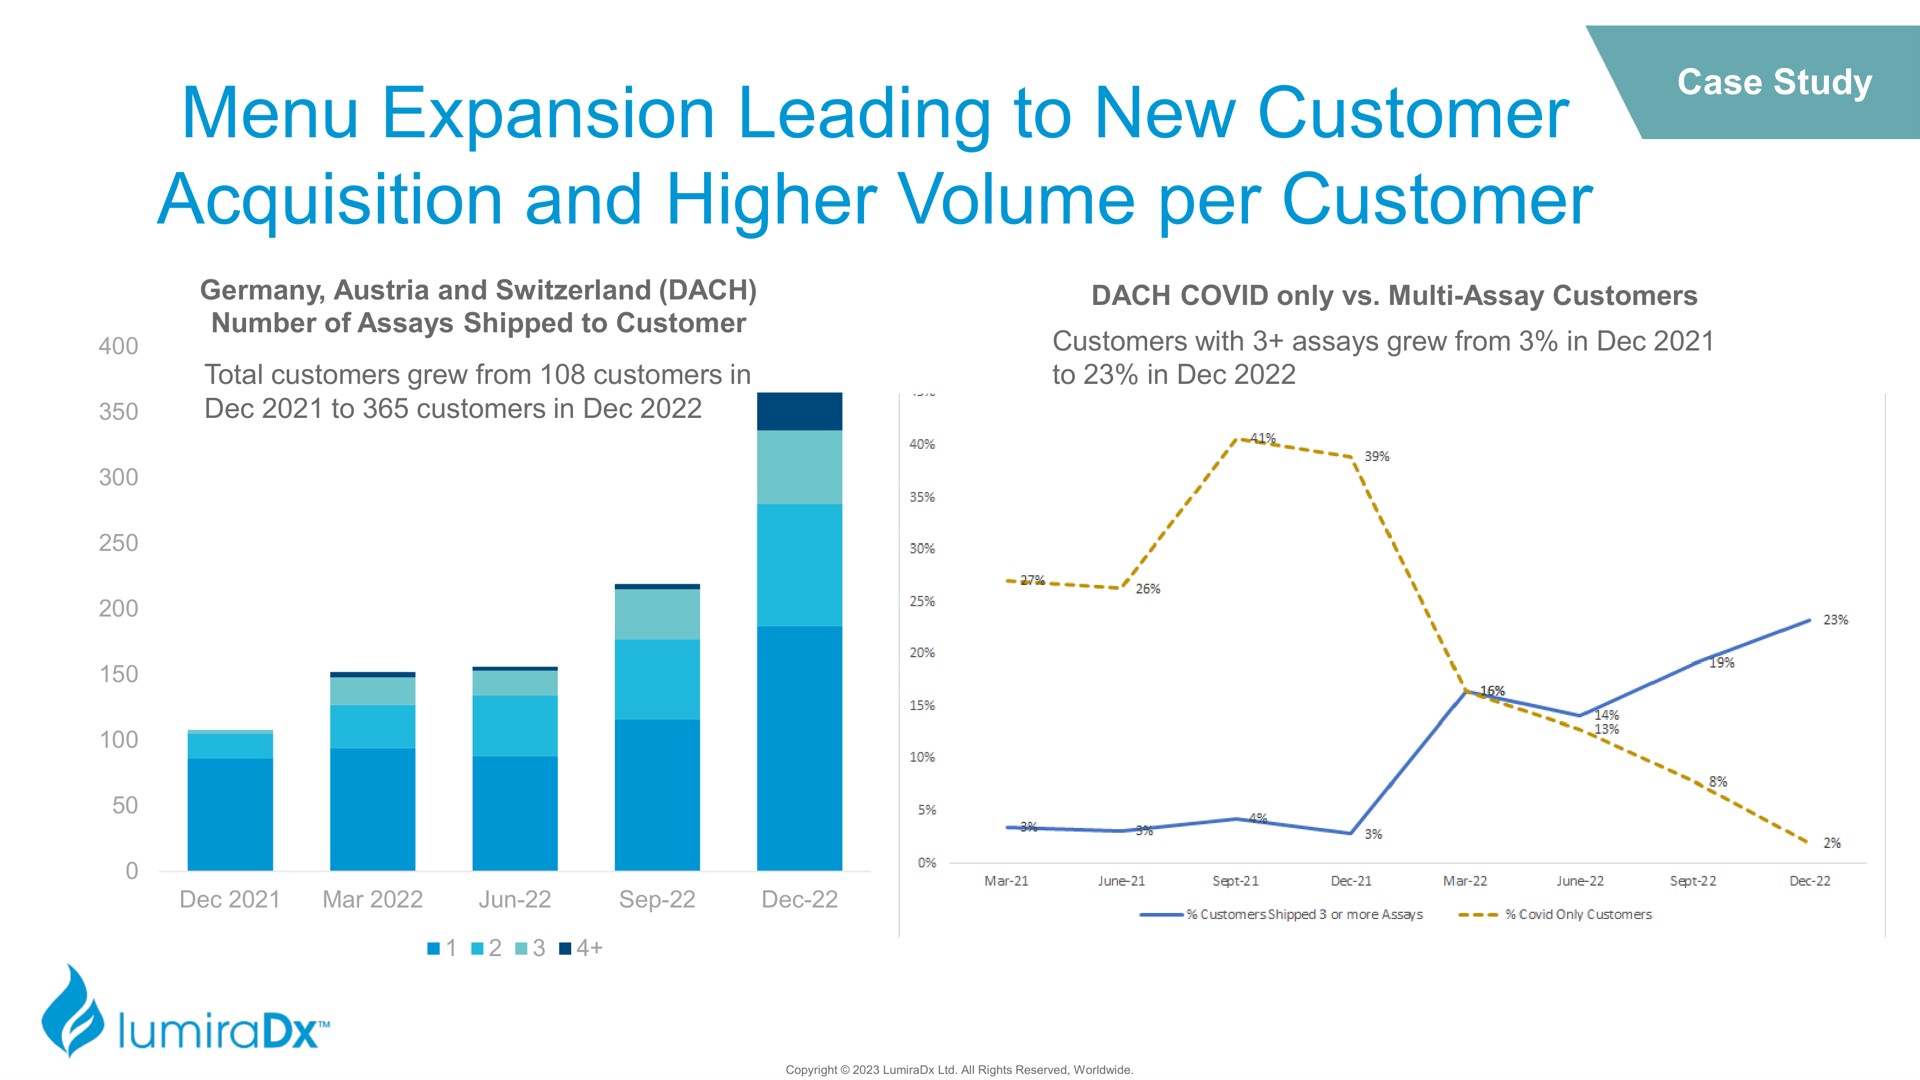 menu expansion leading to new customer acquisition and higher volume per customer | LumiraDx